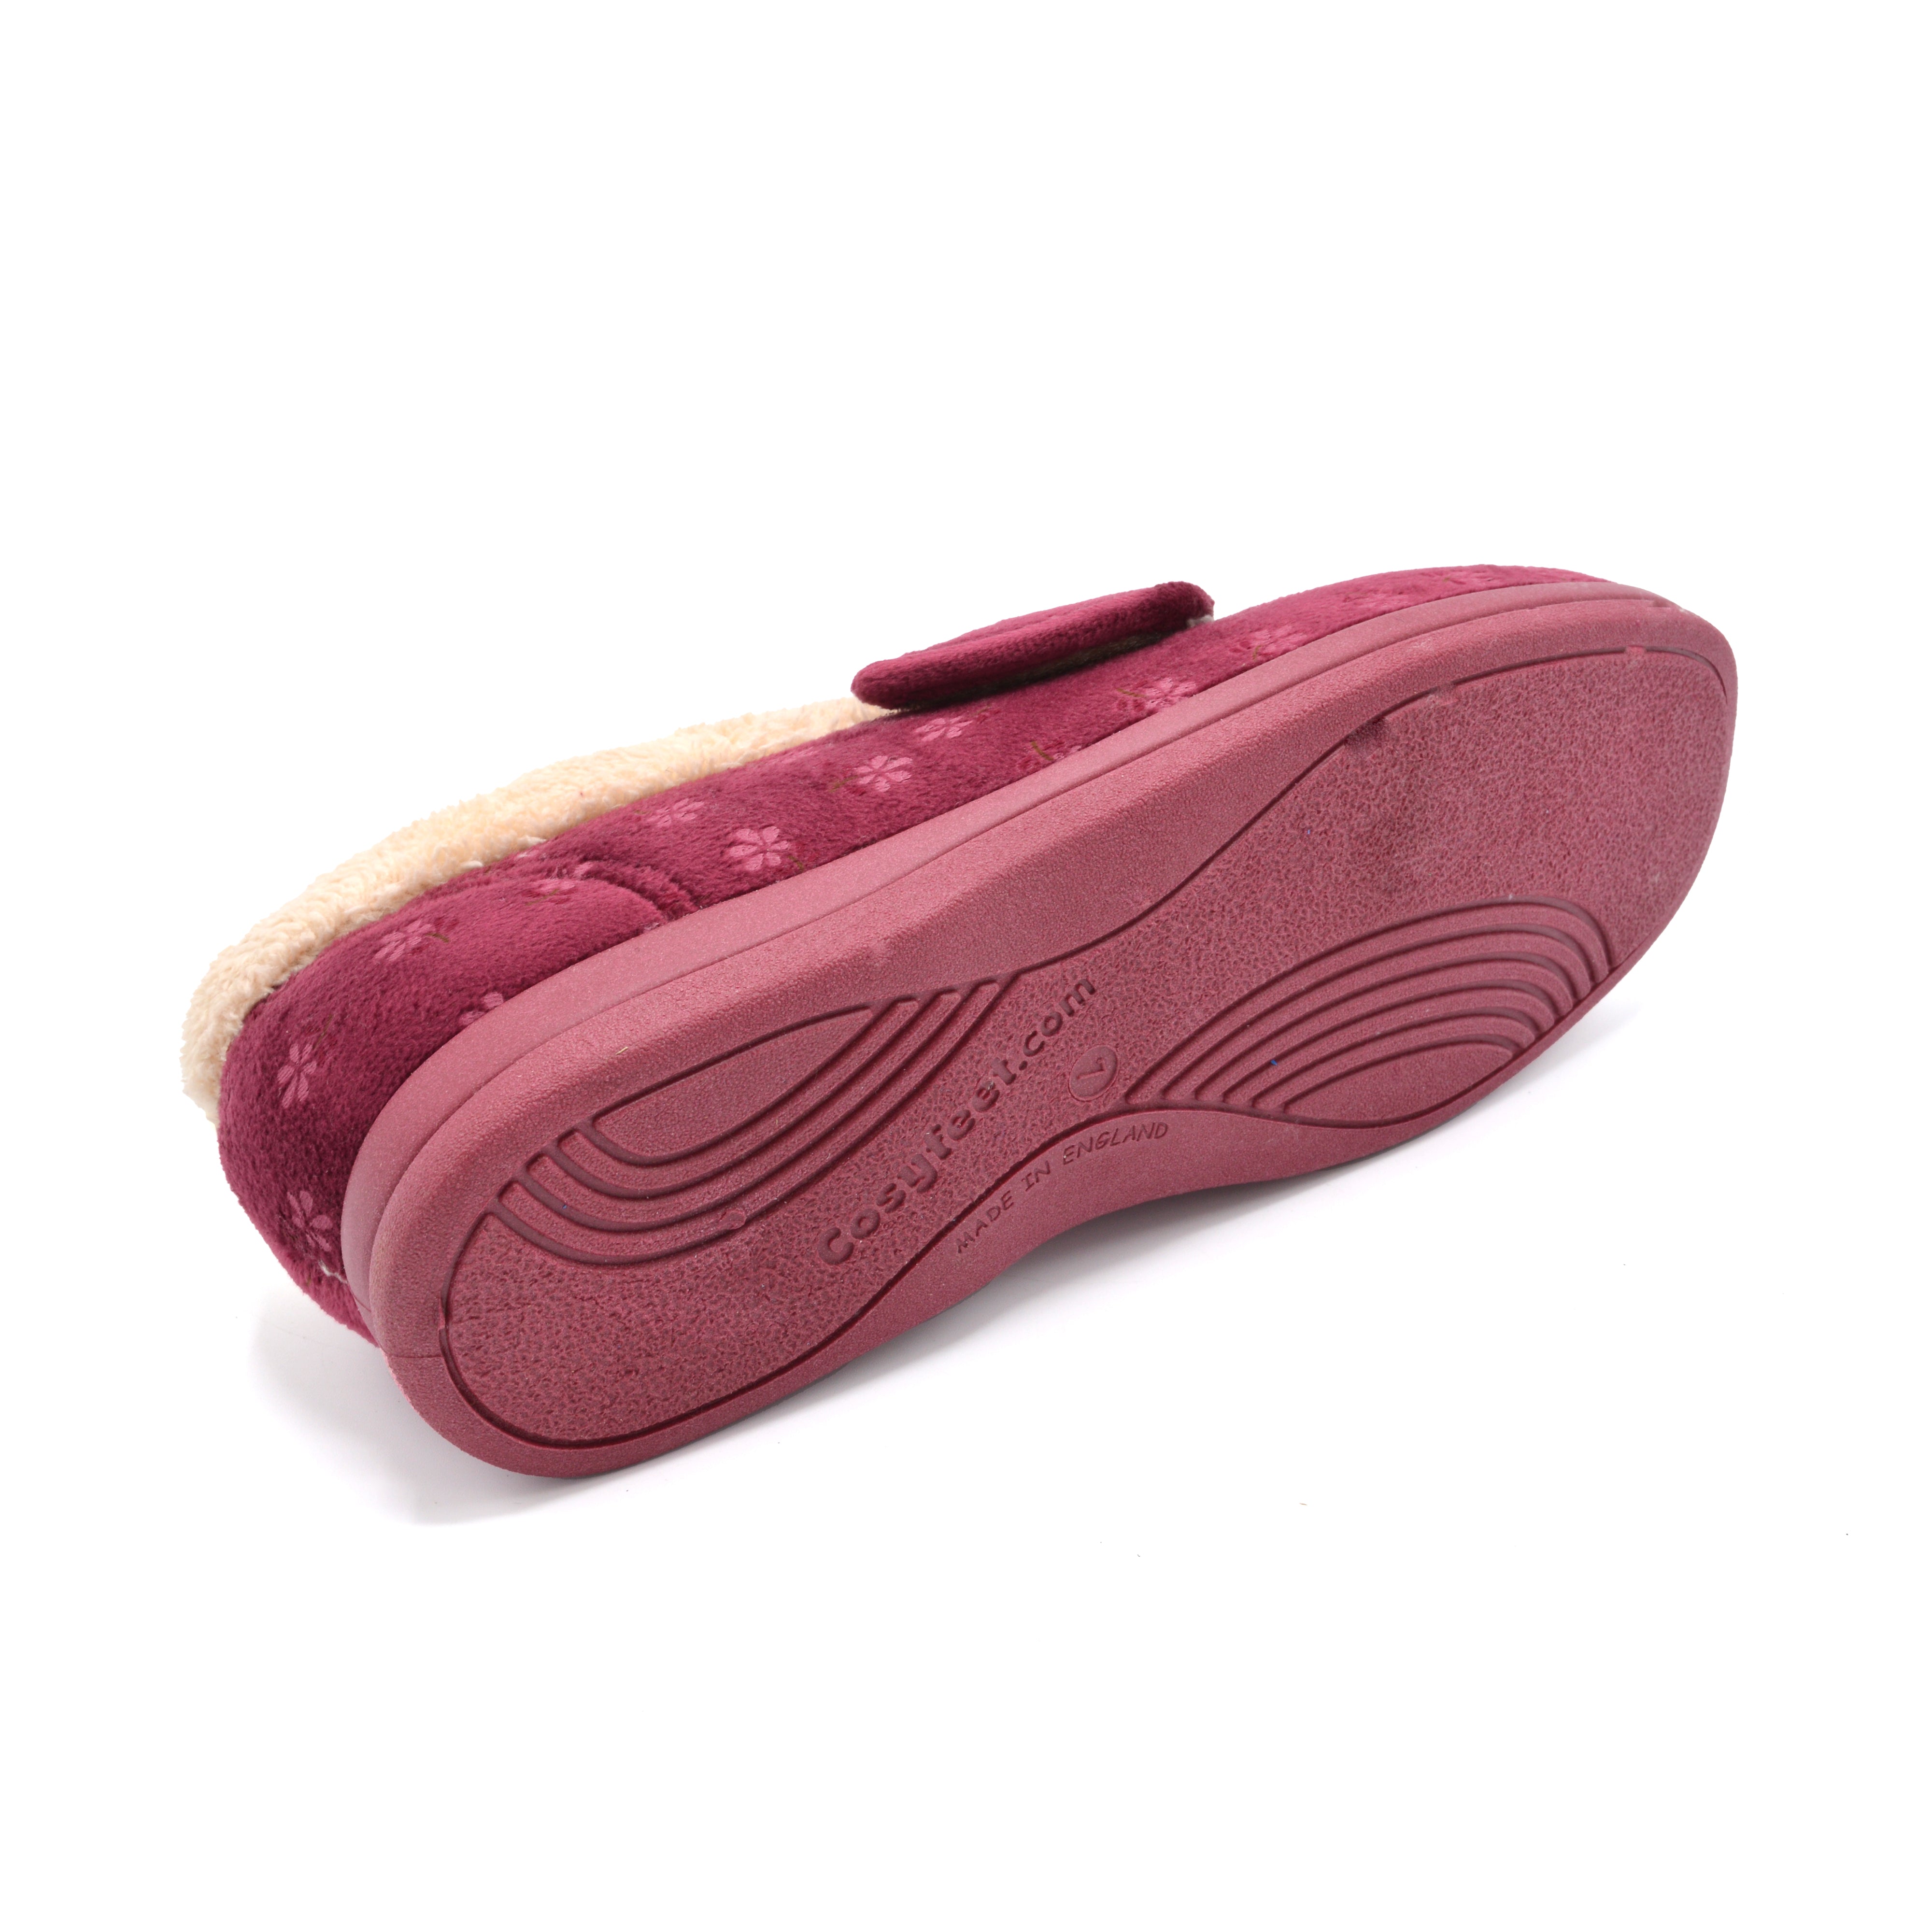 Extra Wide Velcro Slipper For Bunions